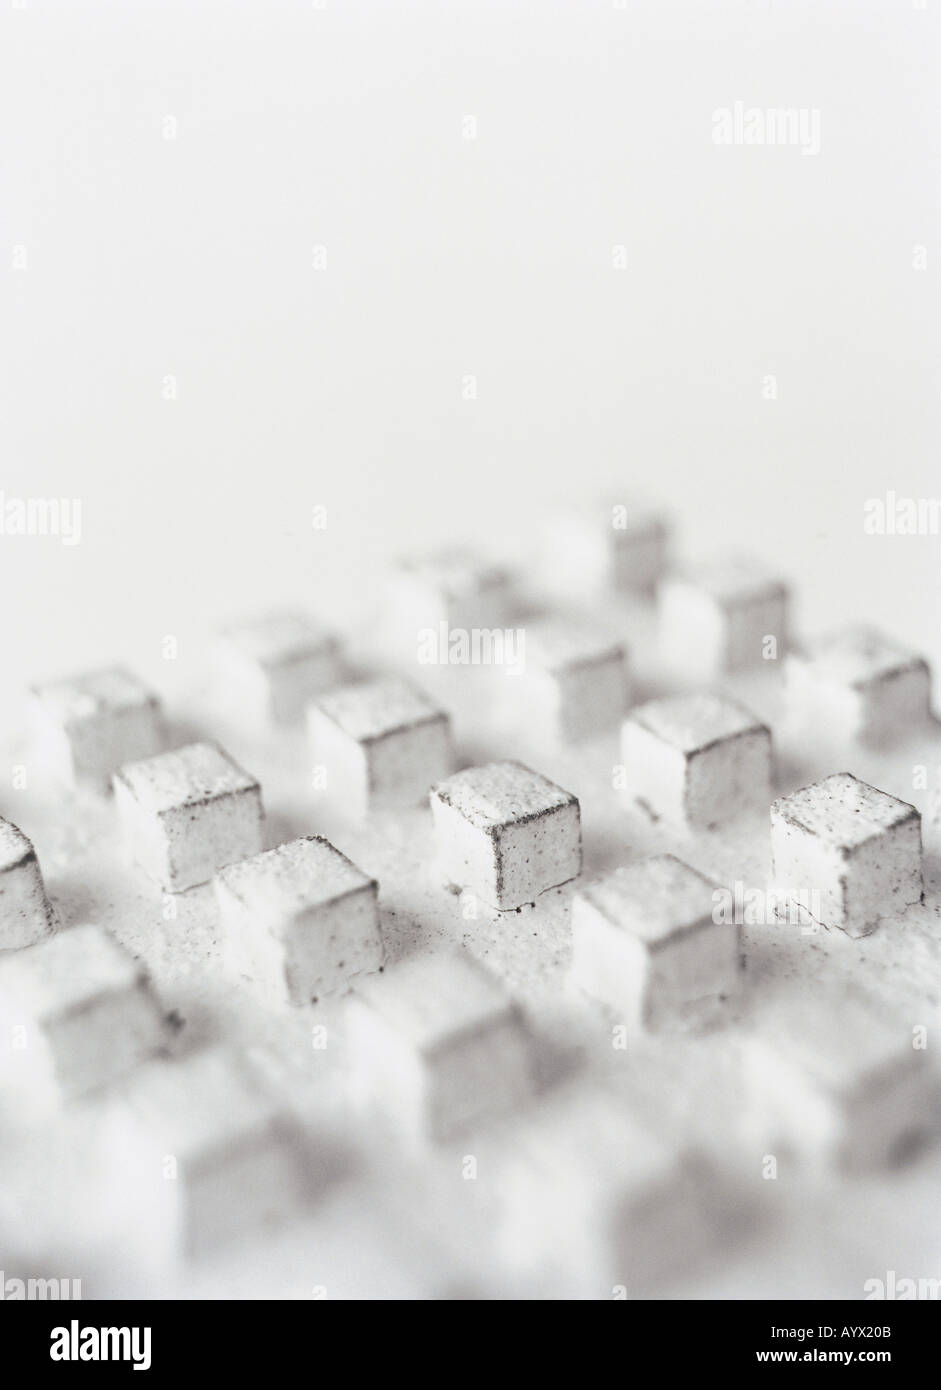 Illustration Object Solid Craft Stock Photo